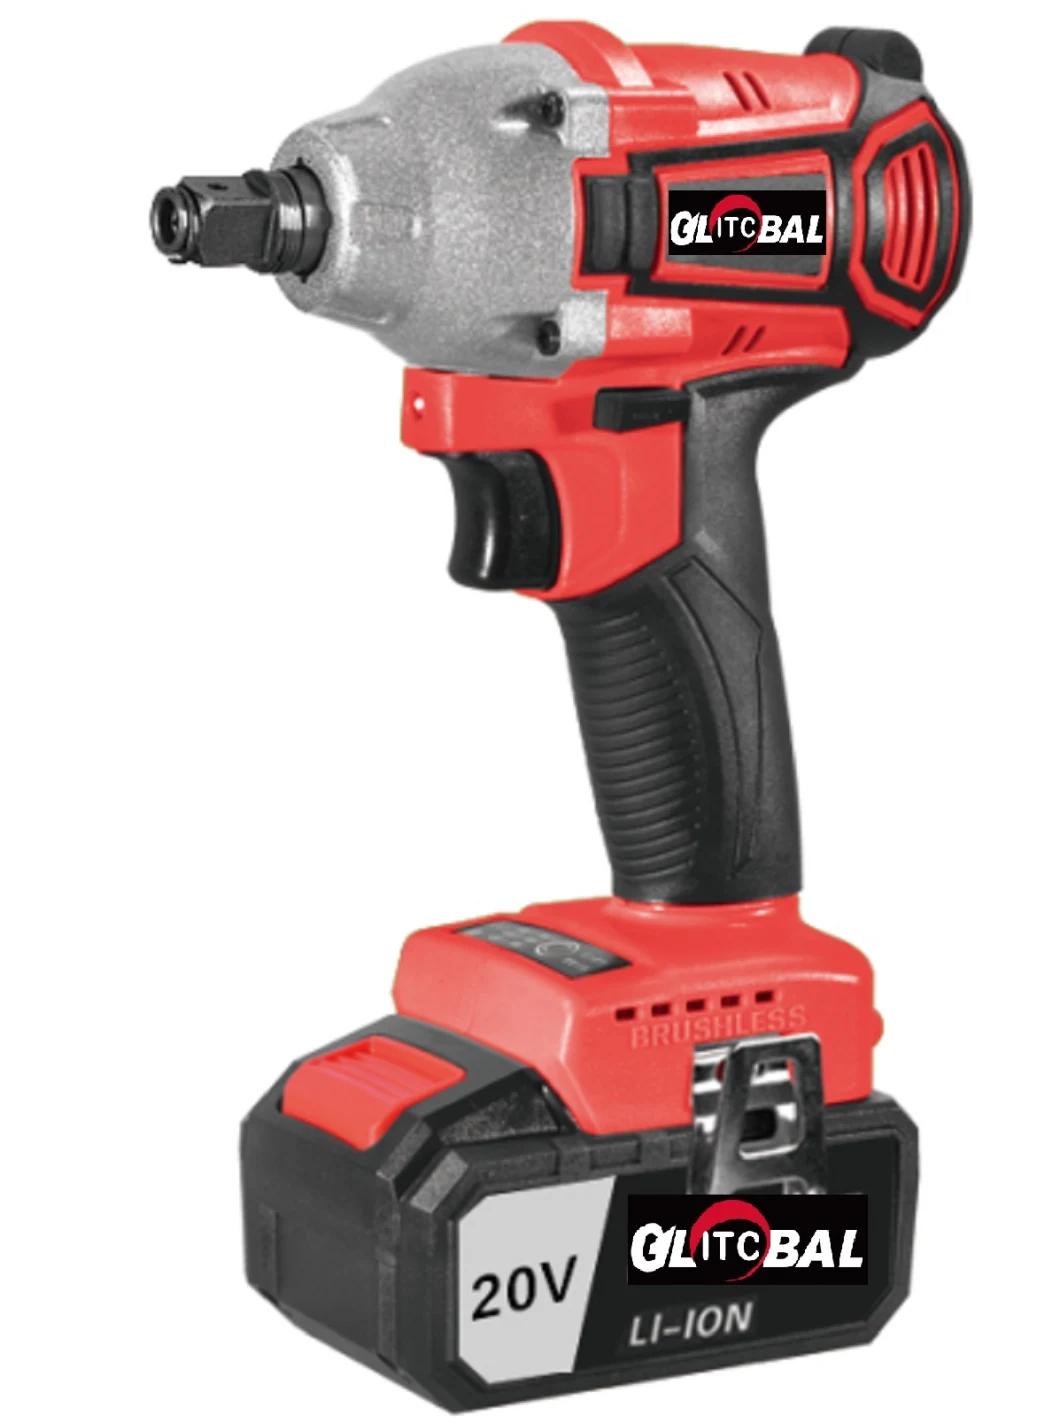 10% off-DC20V Max-Compatible-Li-ion Battery-Electric/Cordless-Power Tools-Screwdriver/Impact Drill